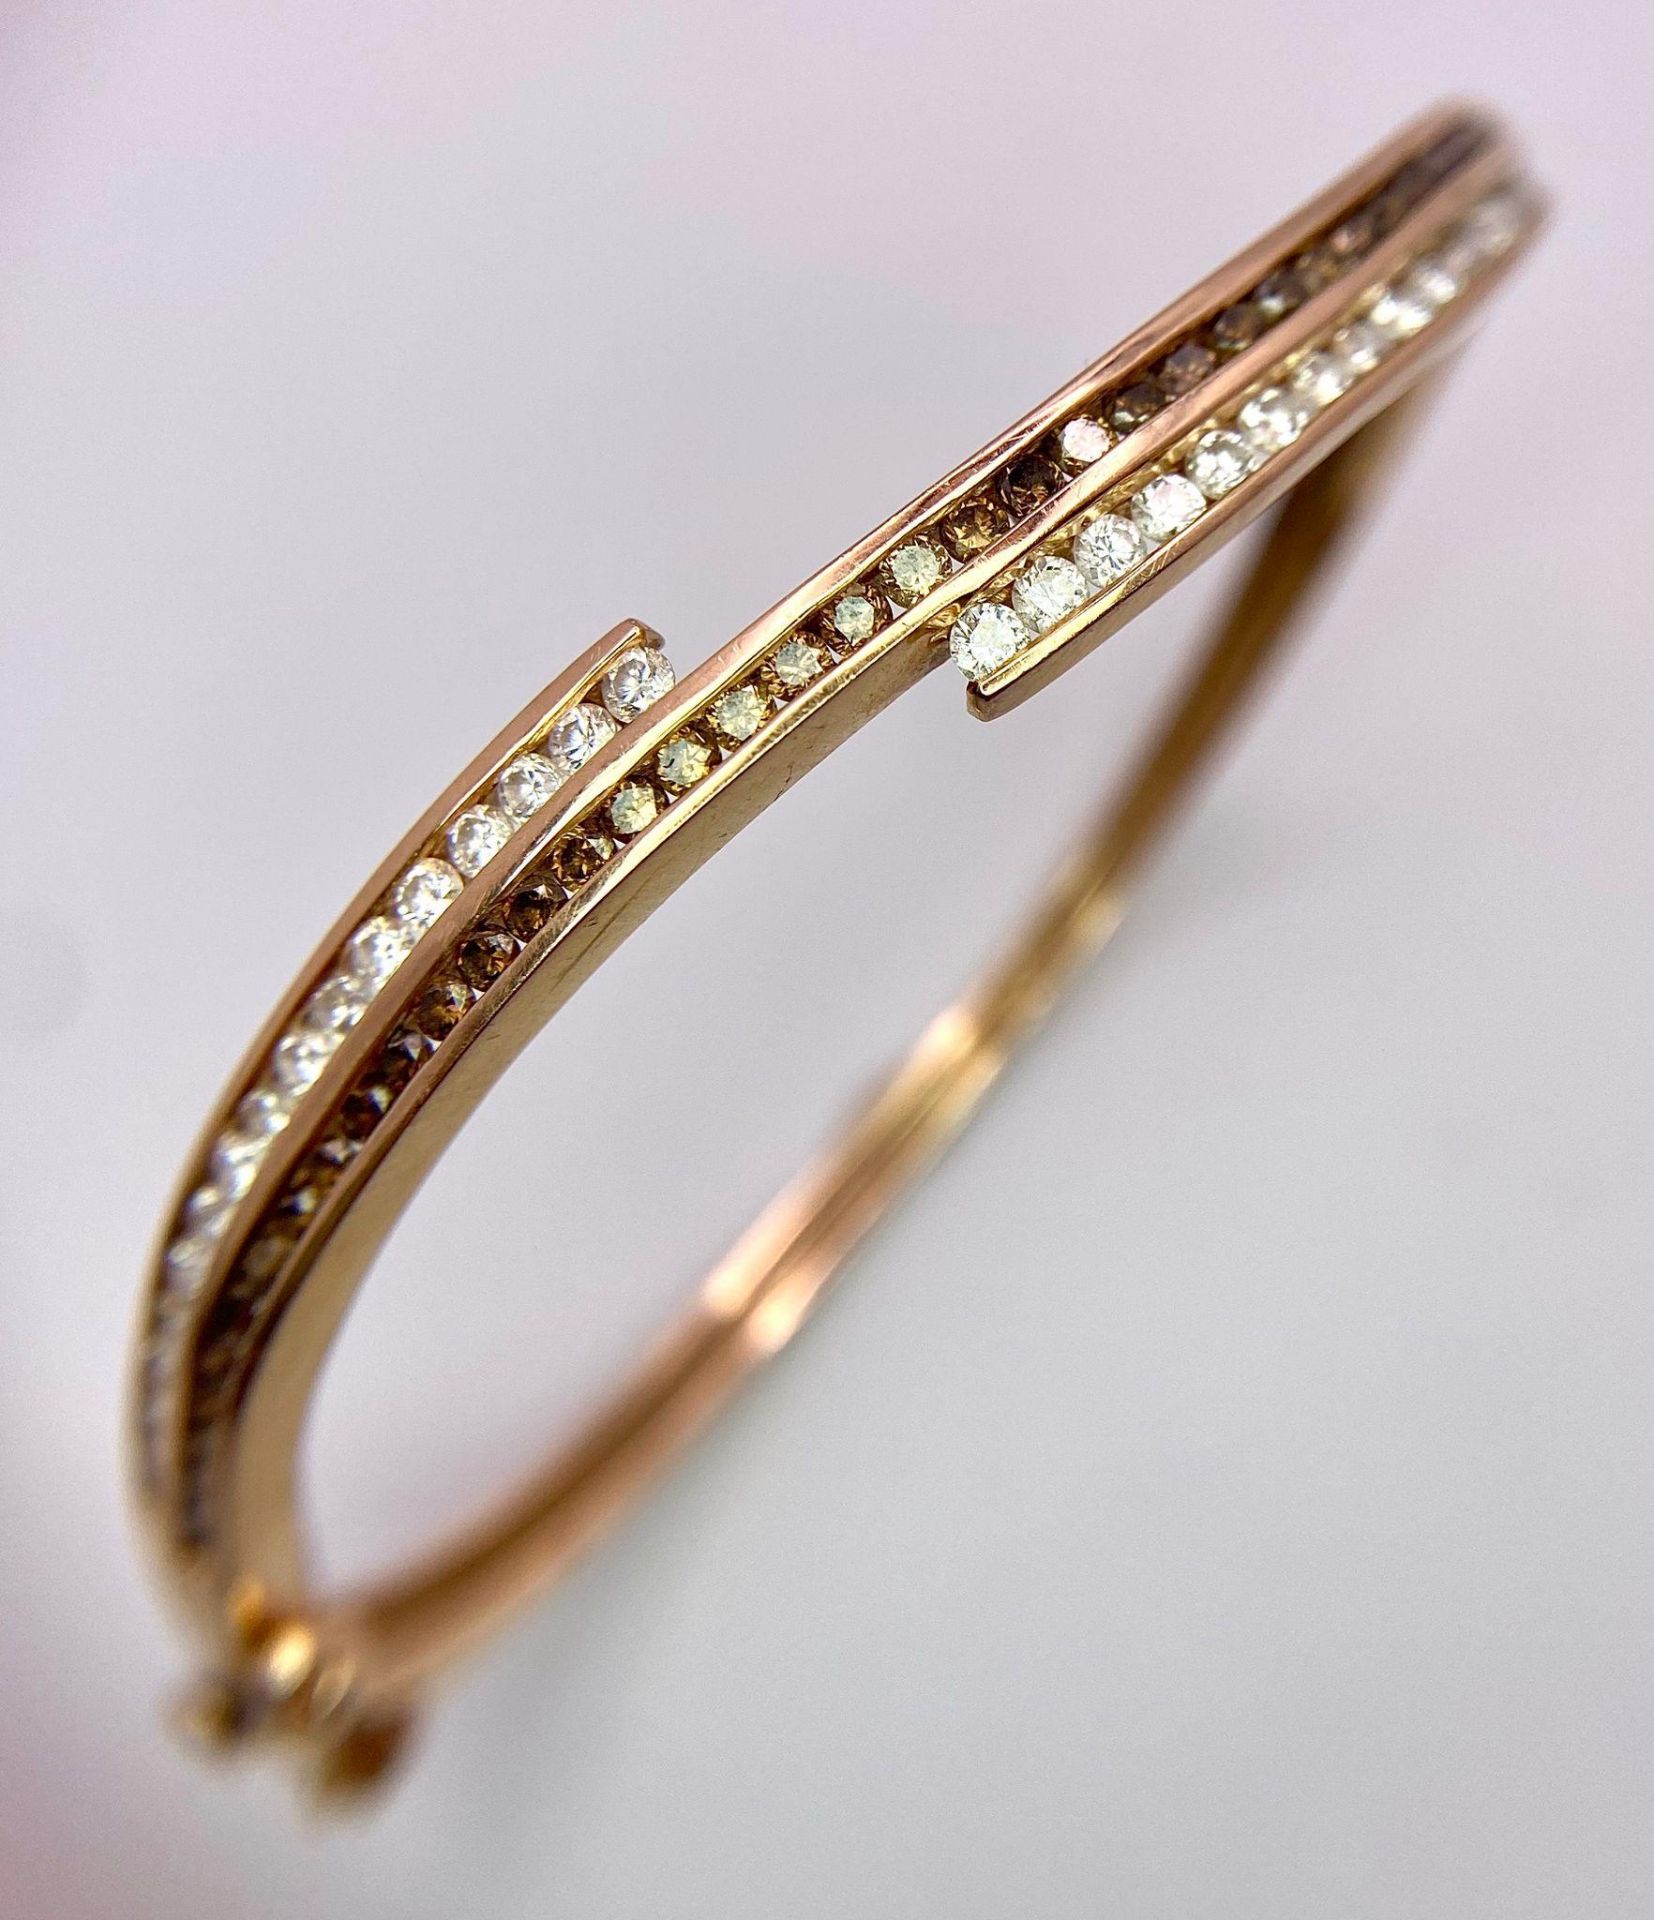 A 14K Rose Gold, White and Cognac Brown Diamond Wave Bangle. Over 60 round cut diamonds ride on a